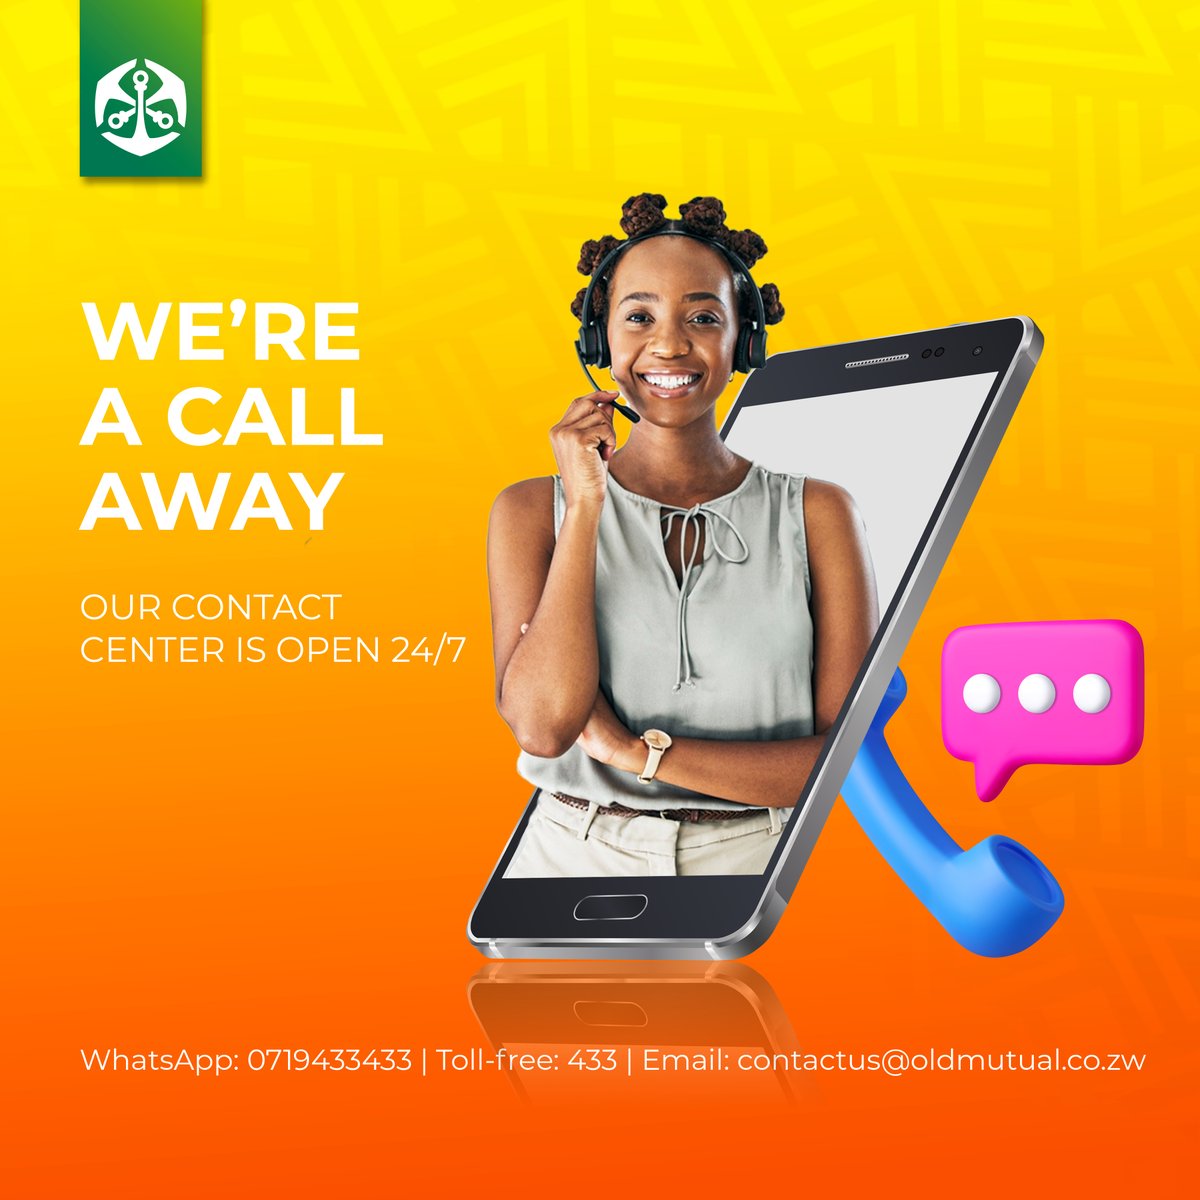 Got questions? Need advice? Fast, reliable and round-the-clock assistance is our promise. Dial in for quick answers and support whenever you need it! #OldMutualCares #OldMutualContactCentre